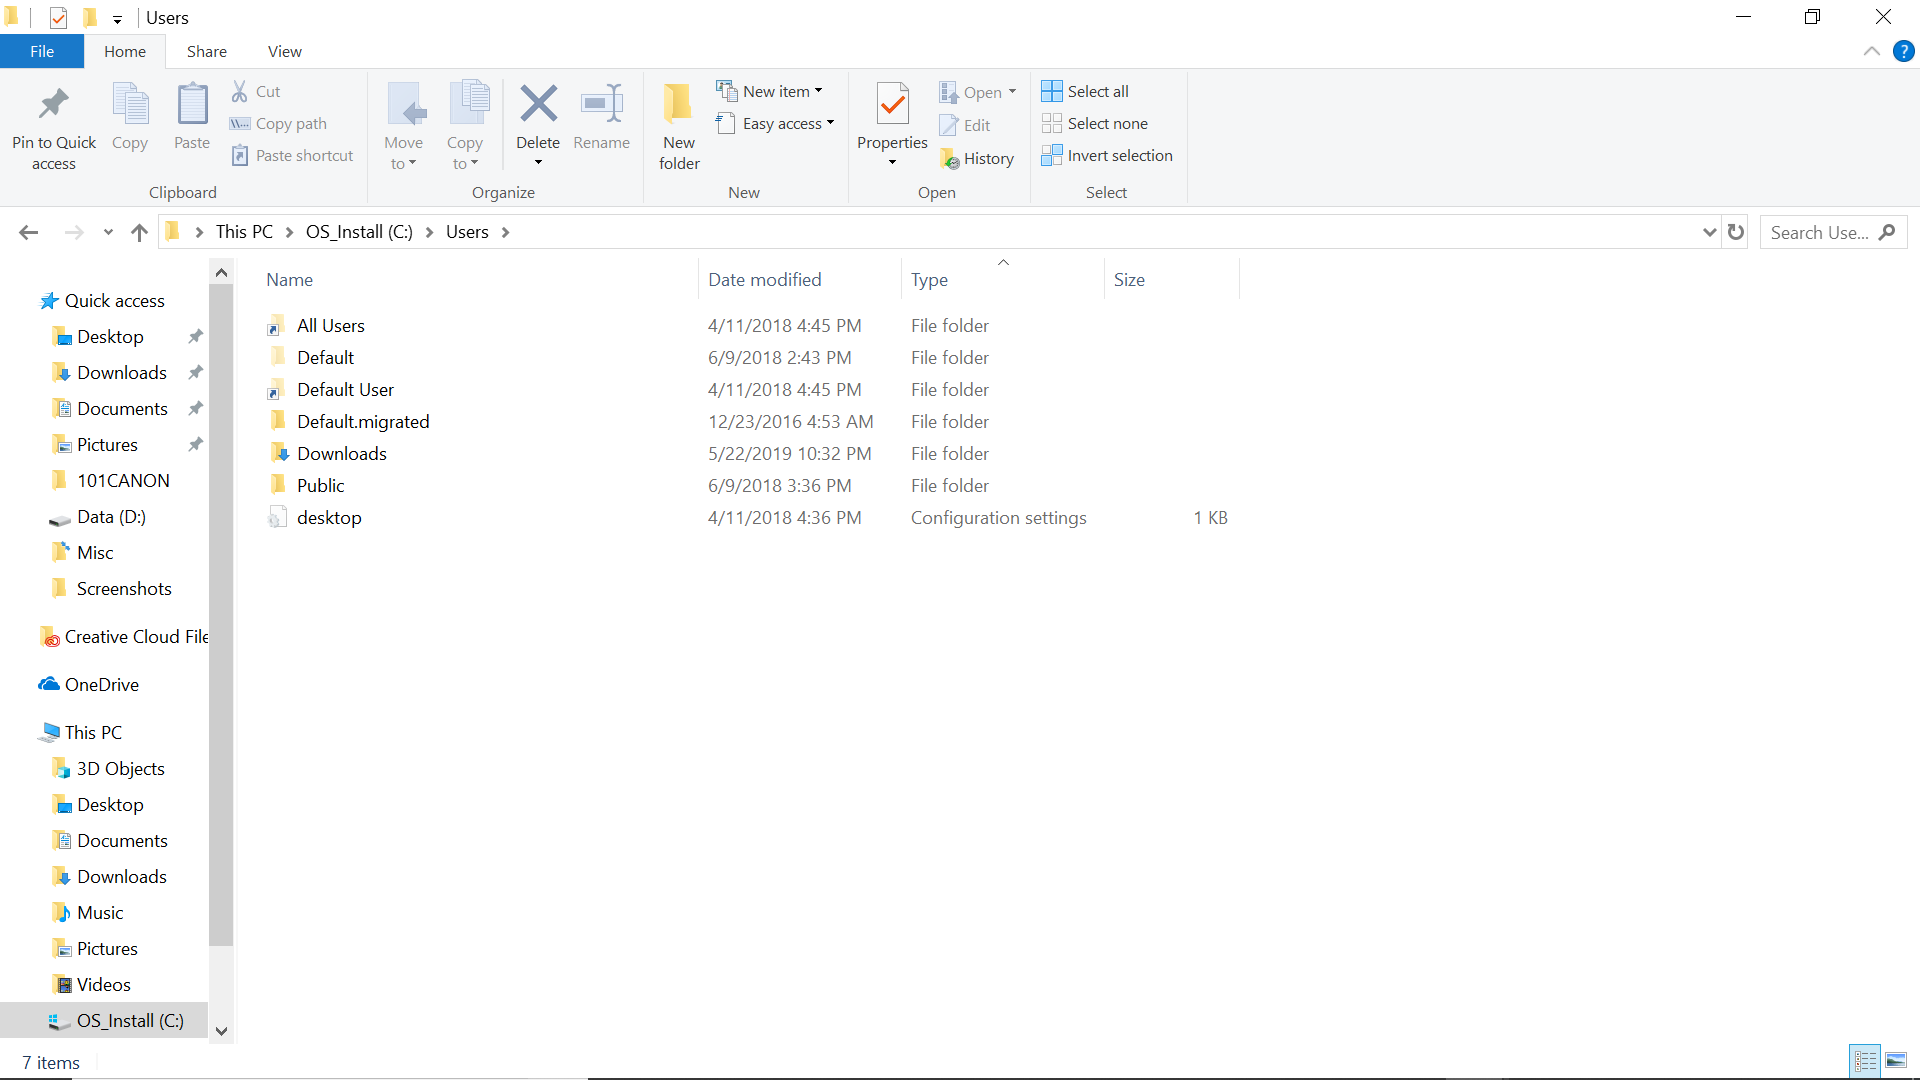 Accidentally merged download folder with Hard drive folder d83c2e72-d906-4cee-8359-e706e64d3e14?upload=true.png